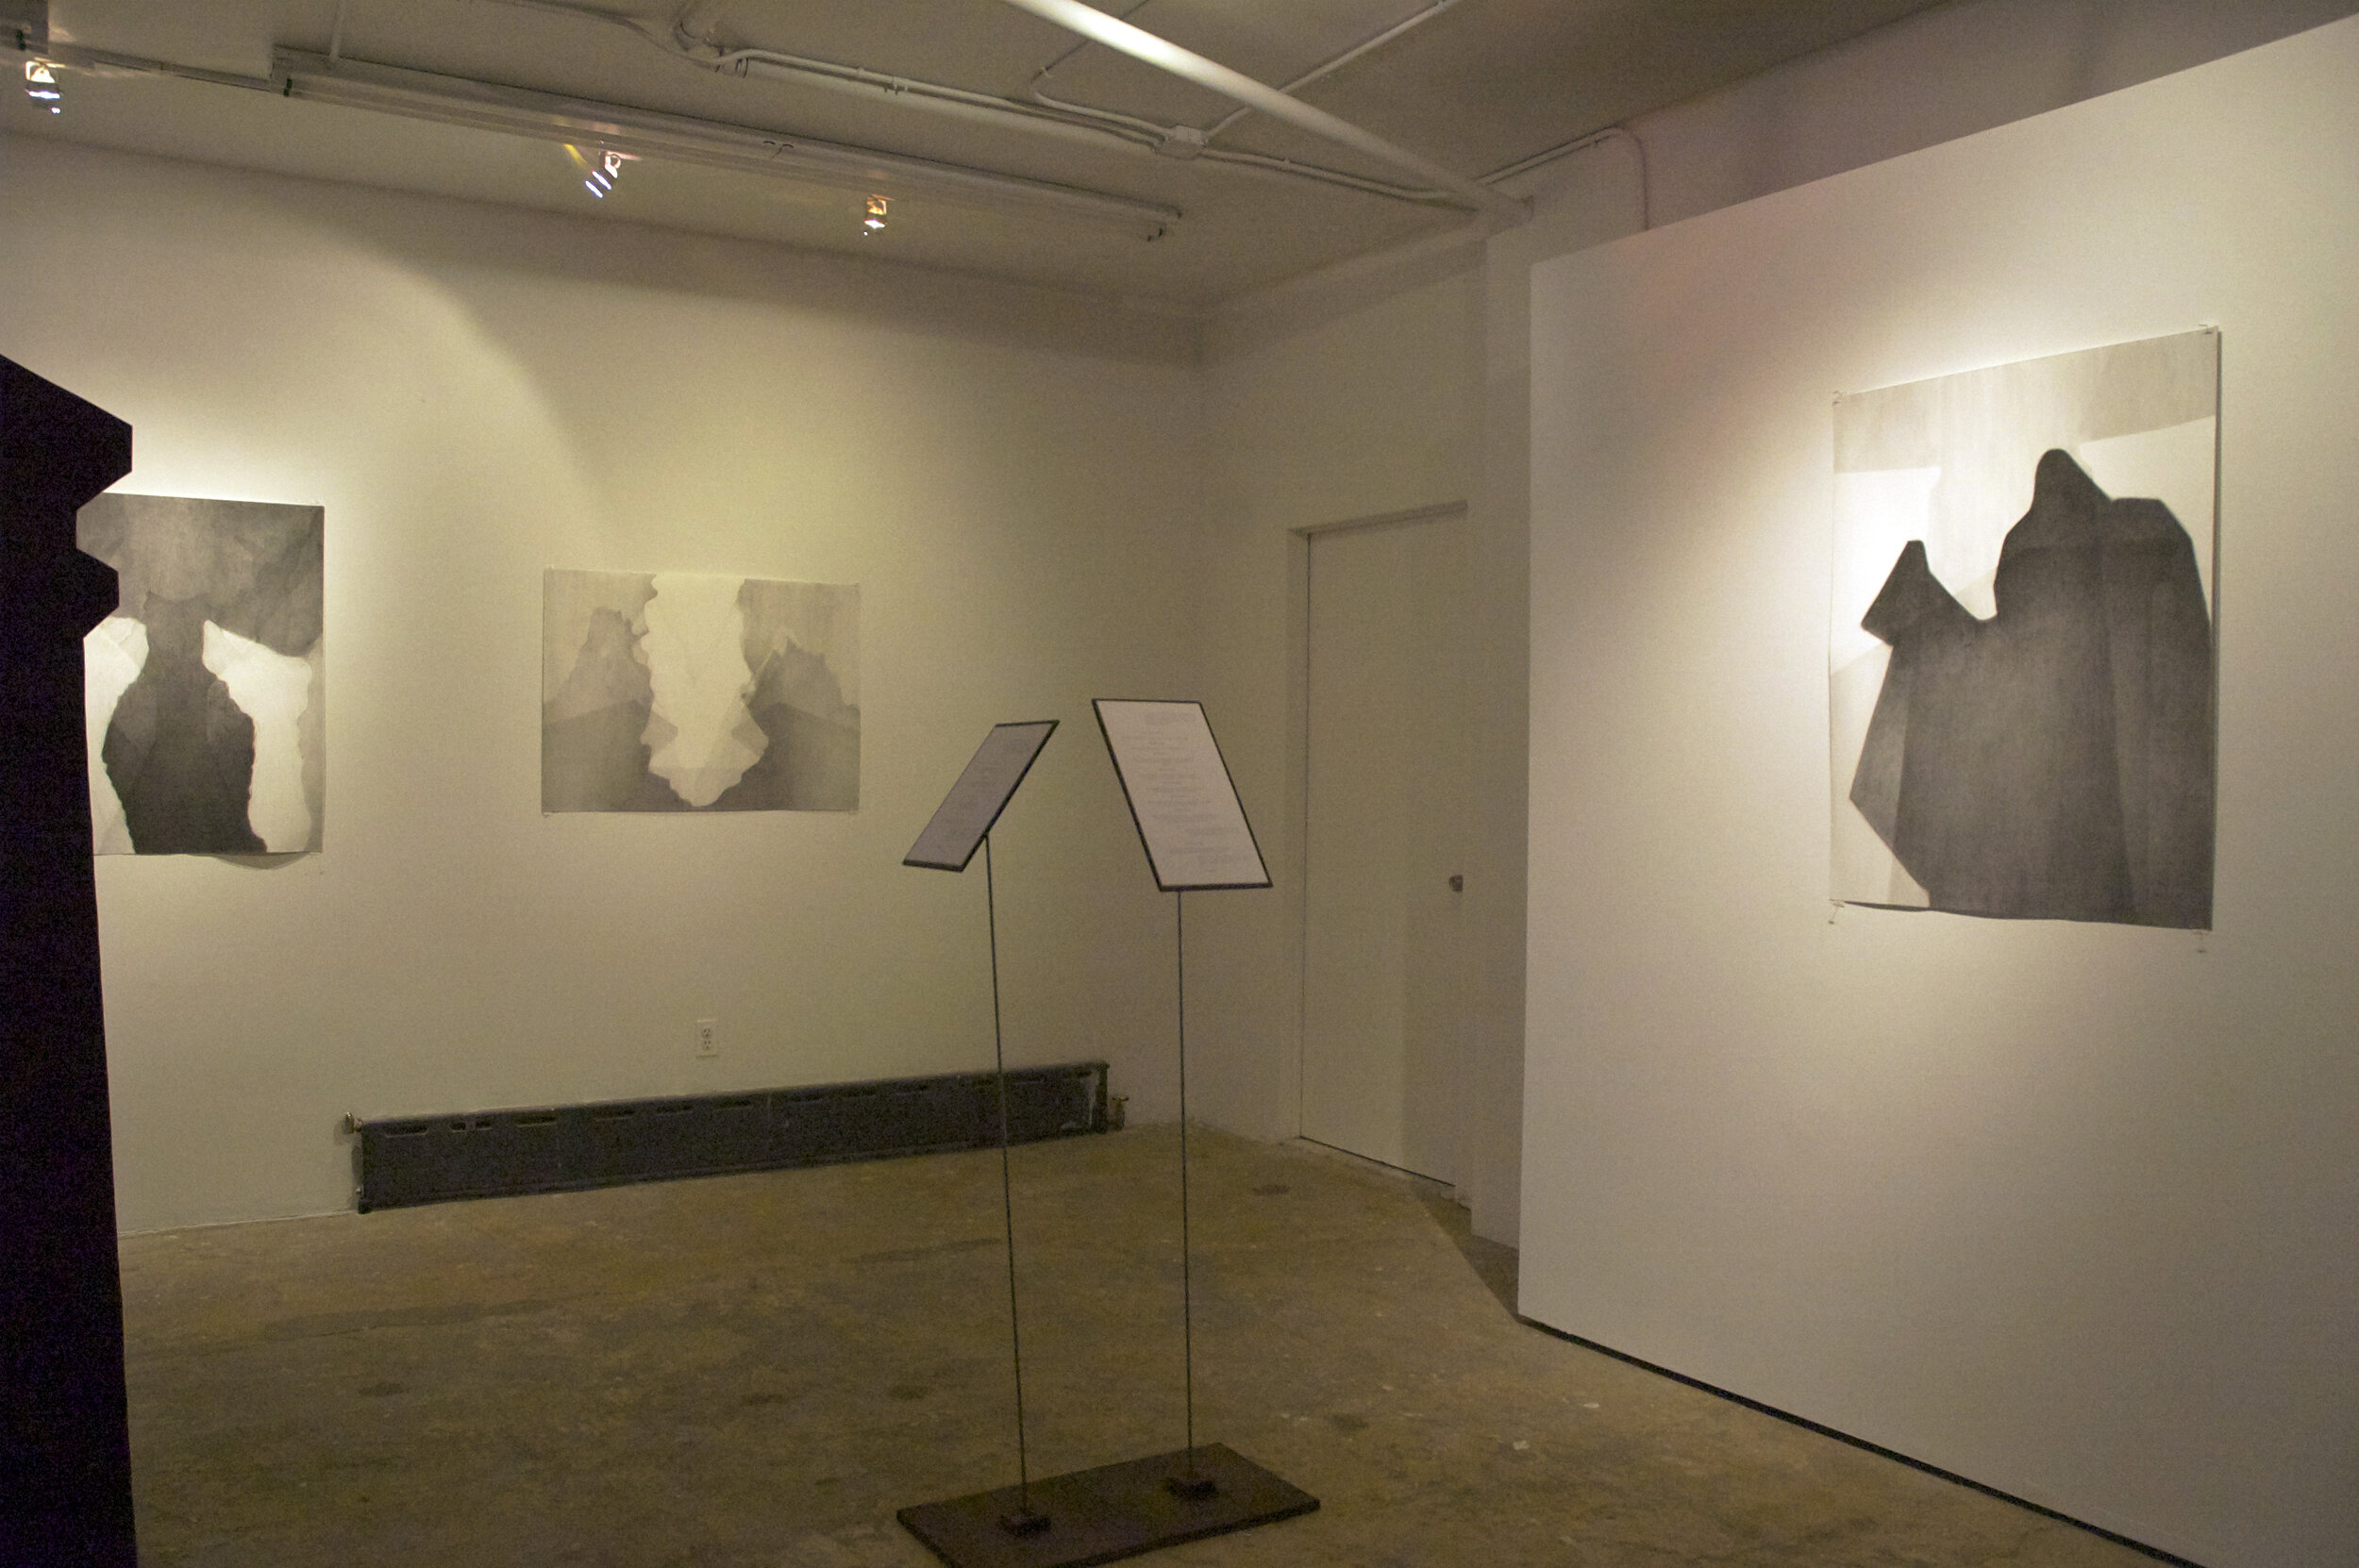 Installation image from the 2013 Adam Hayes exhibition, The room had an imposing dominance over the man, at Cindy Rucker Gallery